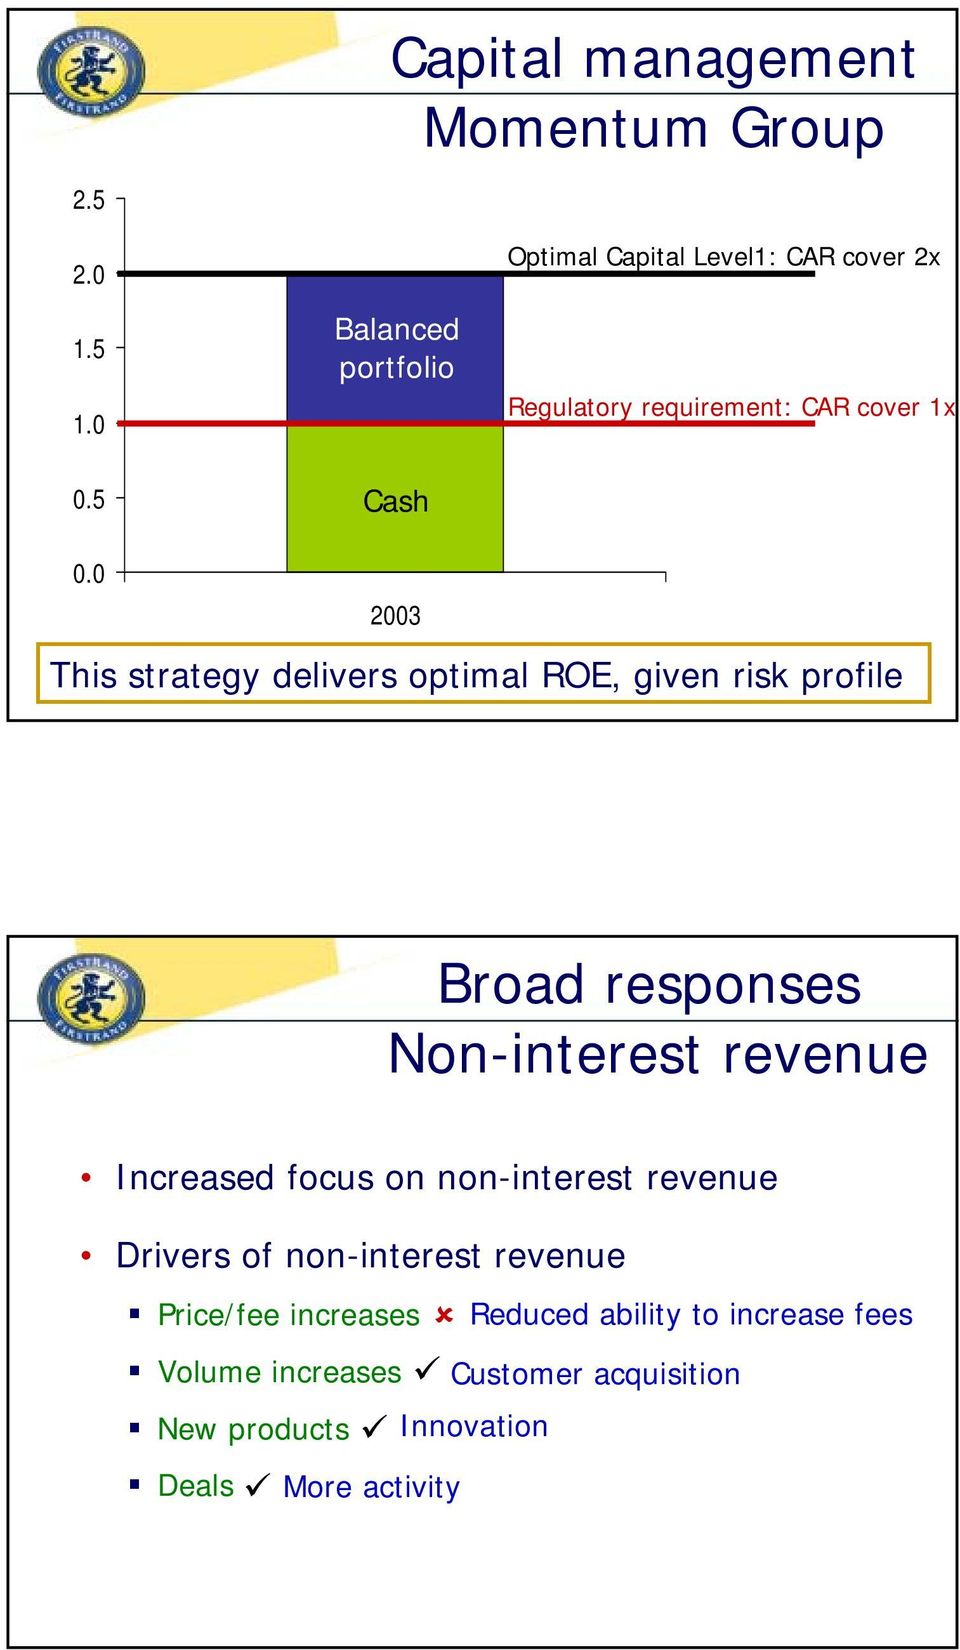 0 2003 This strategy delivers optimal ROE, given risk profile Broad responses Non-interest revenue Increased focus